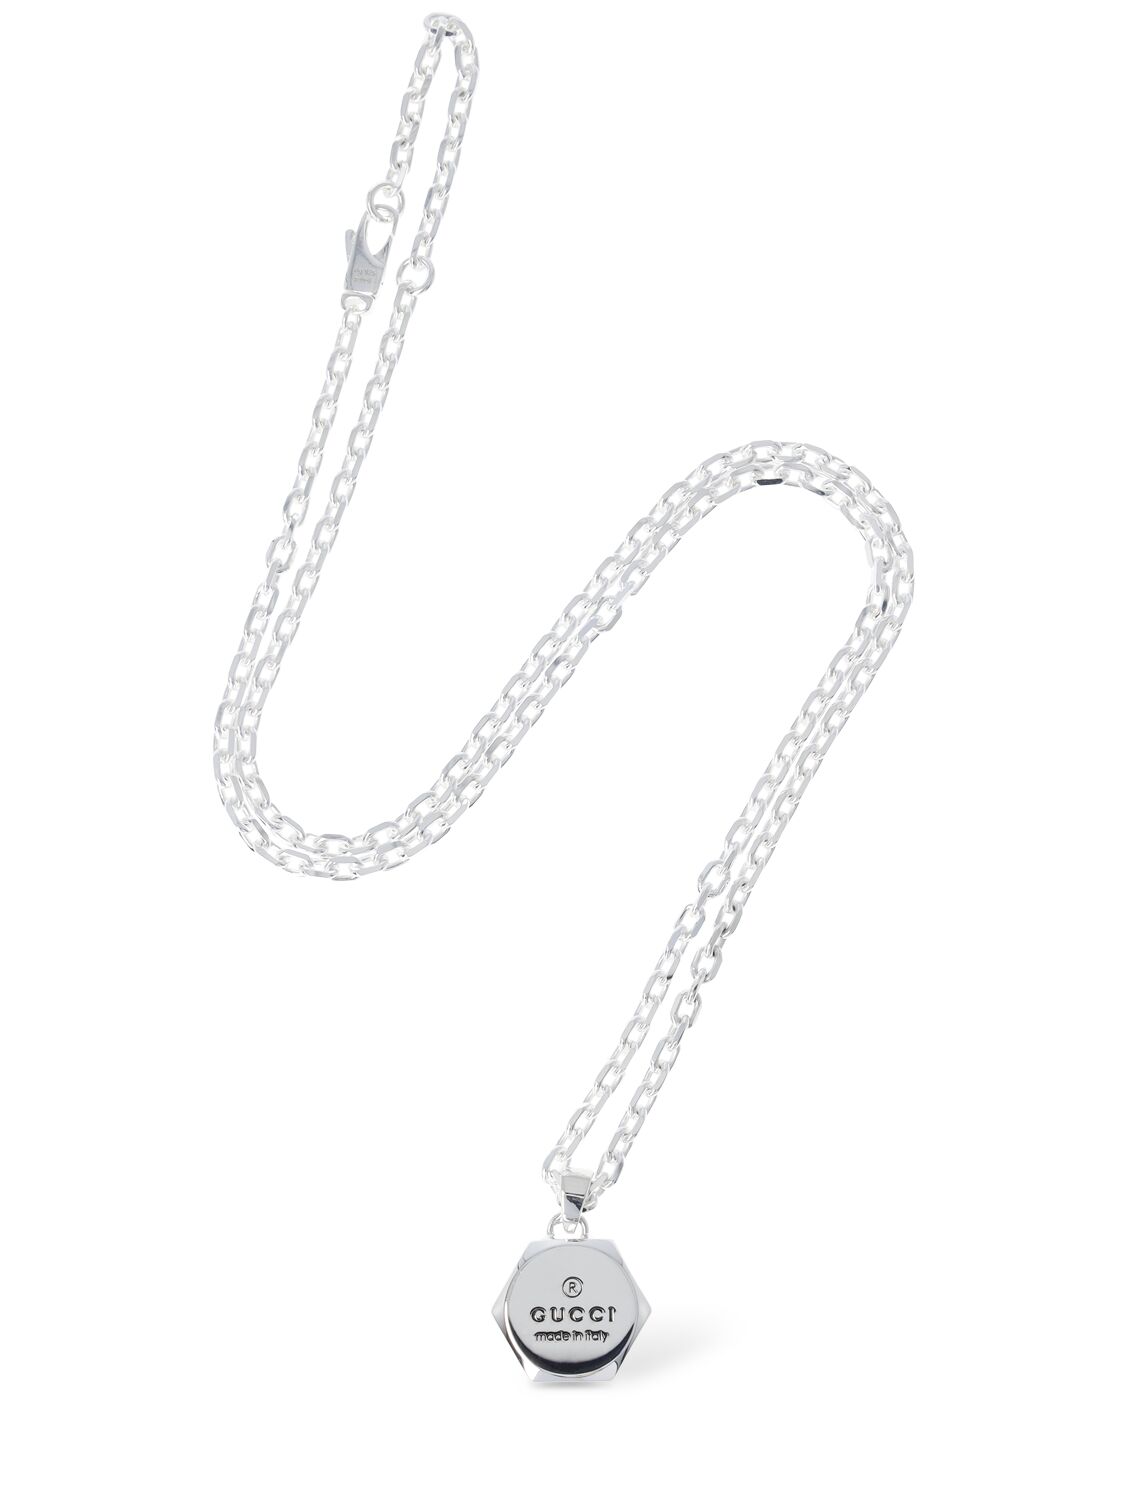 Shop Gucci Trademark Sterling Silver Necklace